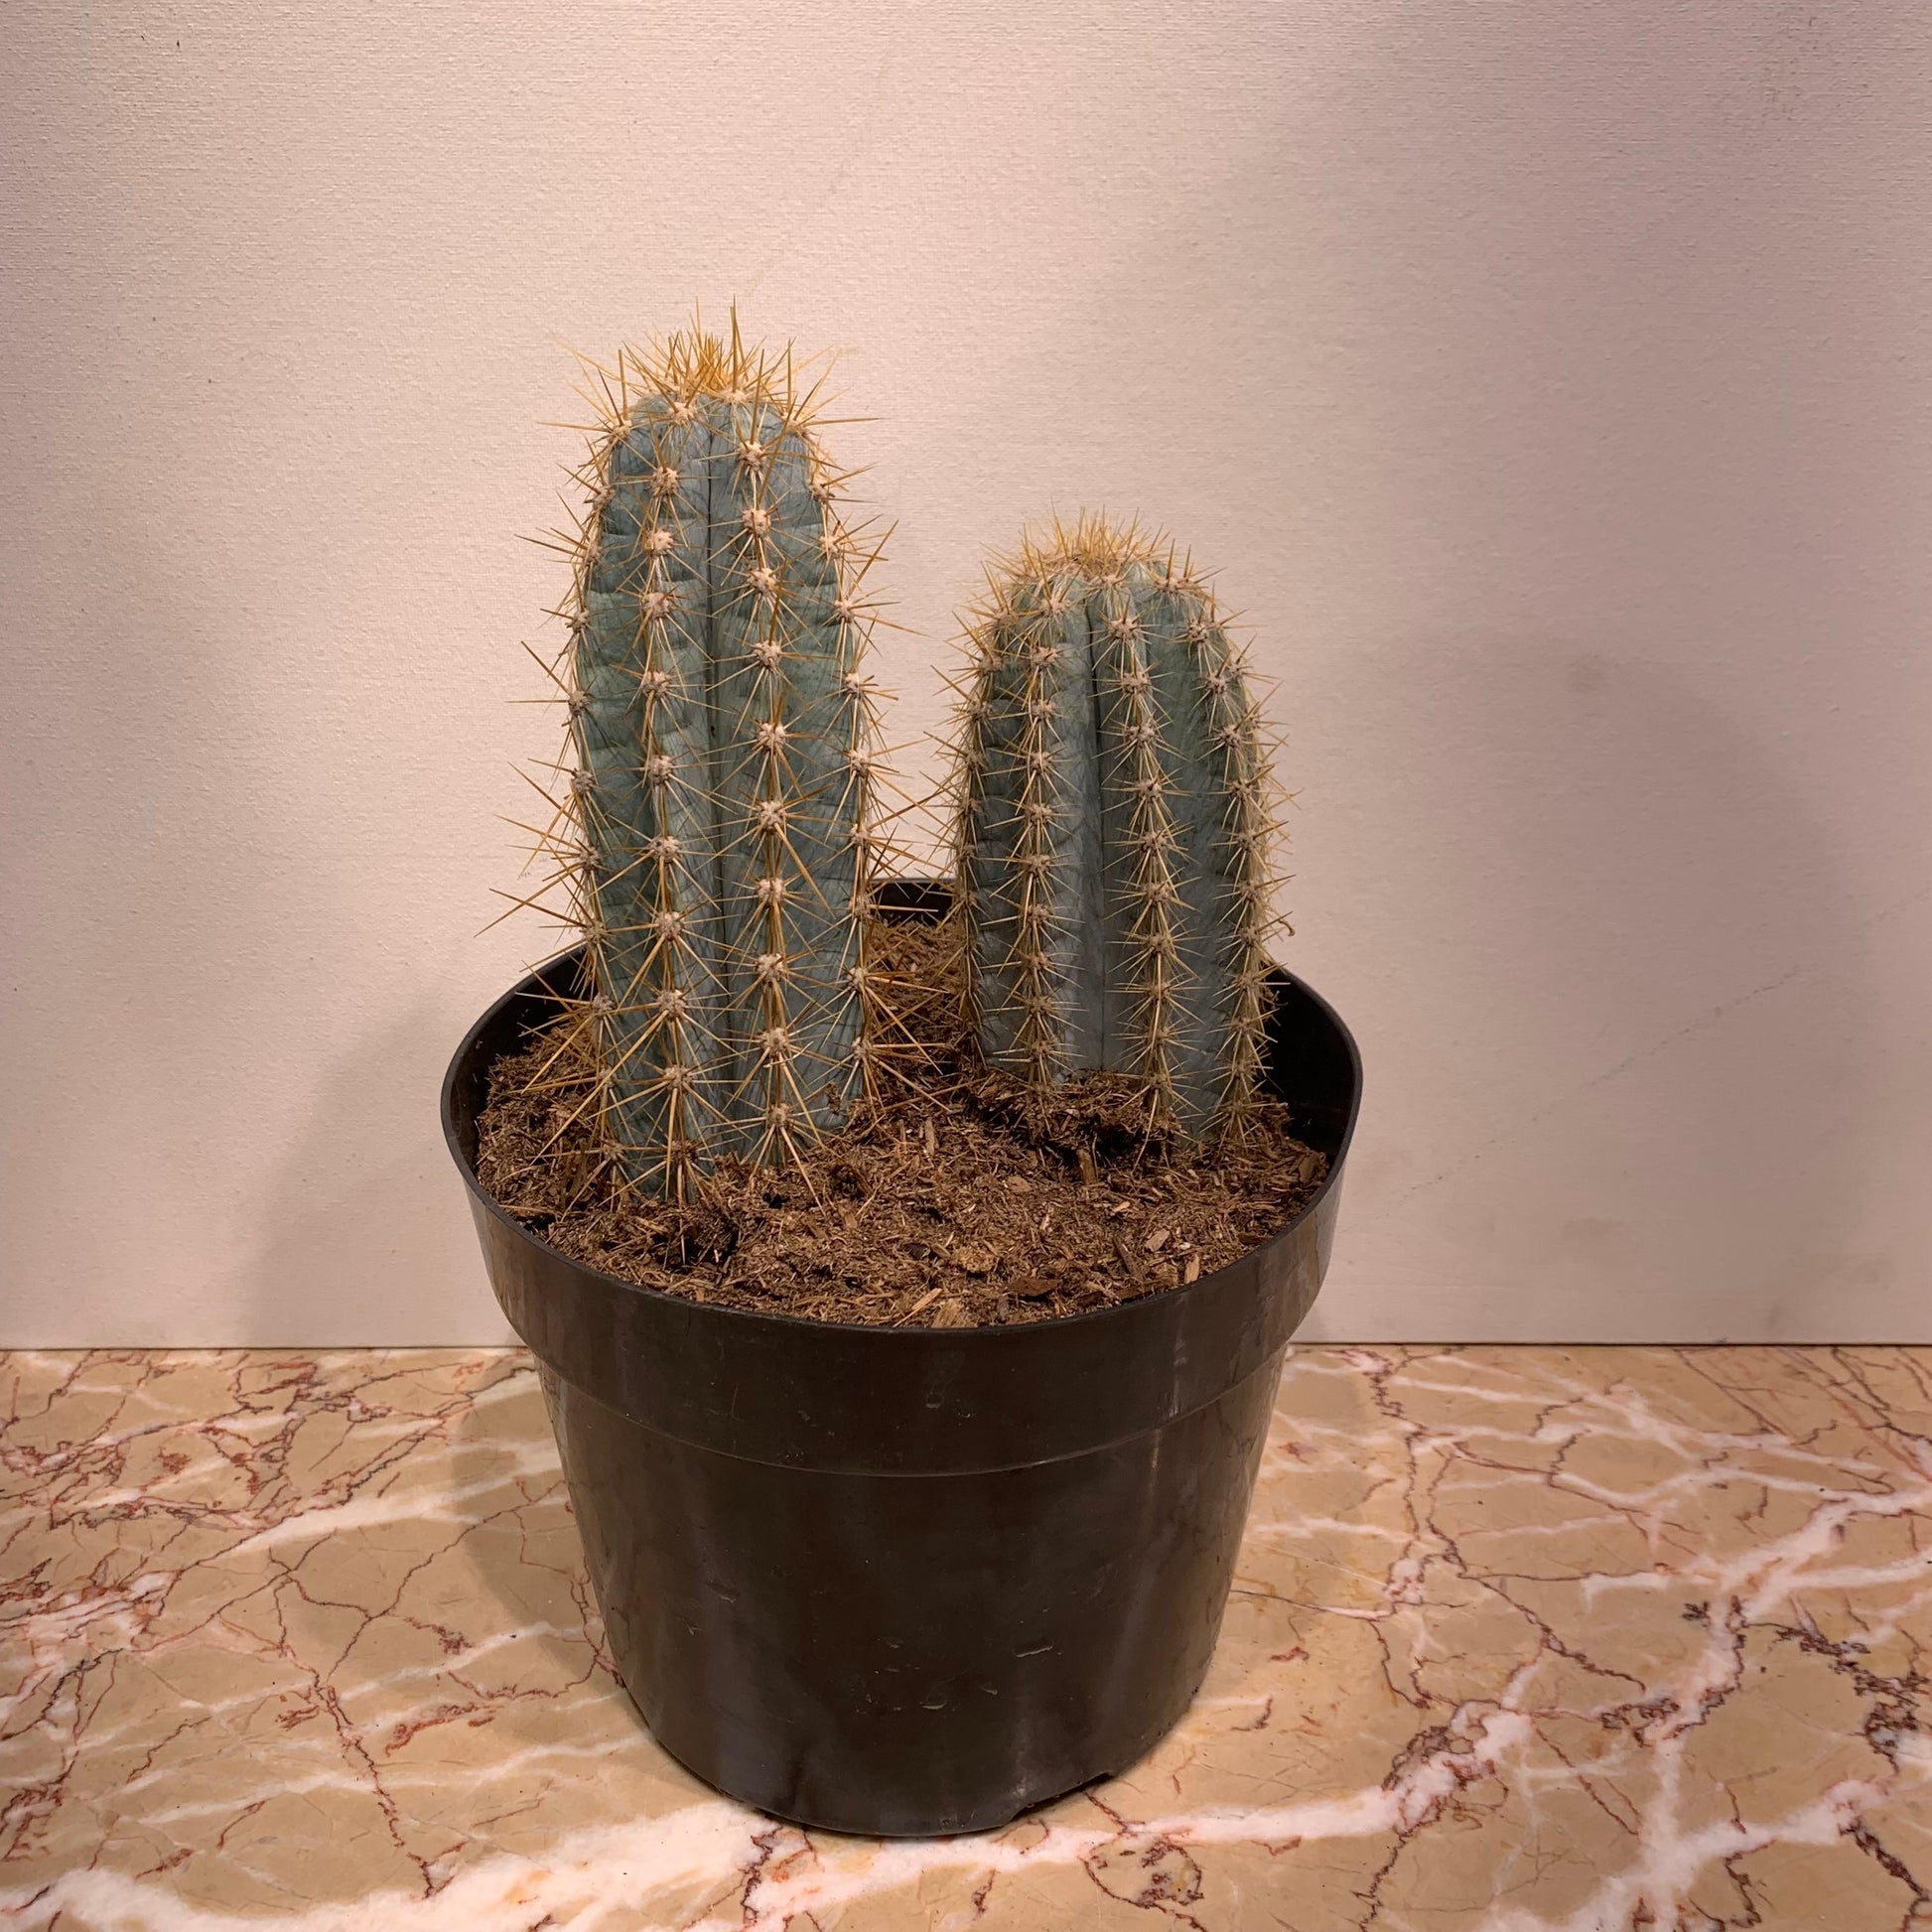 Blue Candle Cactus (Myrtillocactus) in a 8 inch pot. Indoor plant for sale by Promise Supply for delivery and pickup in Toronto